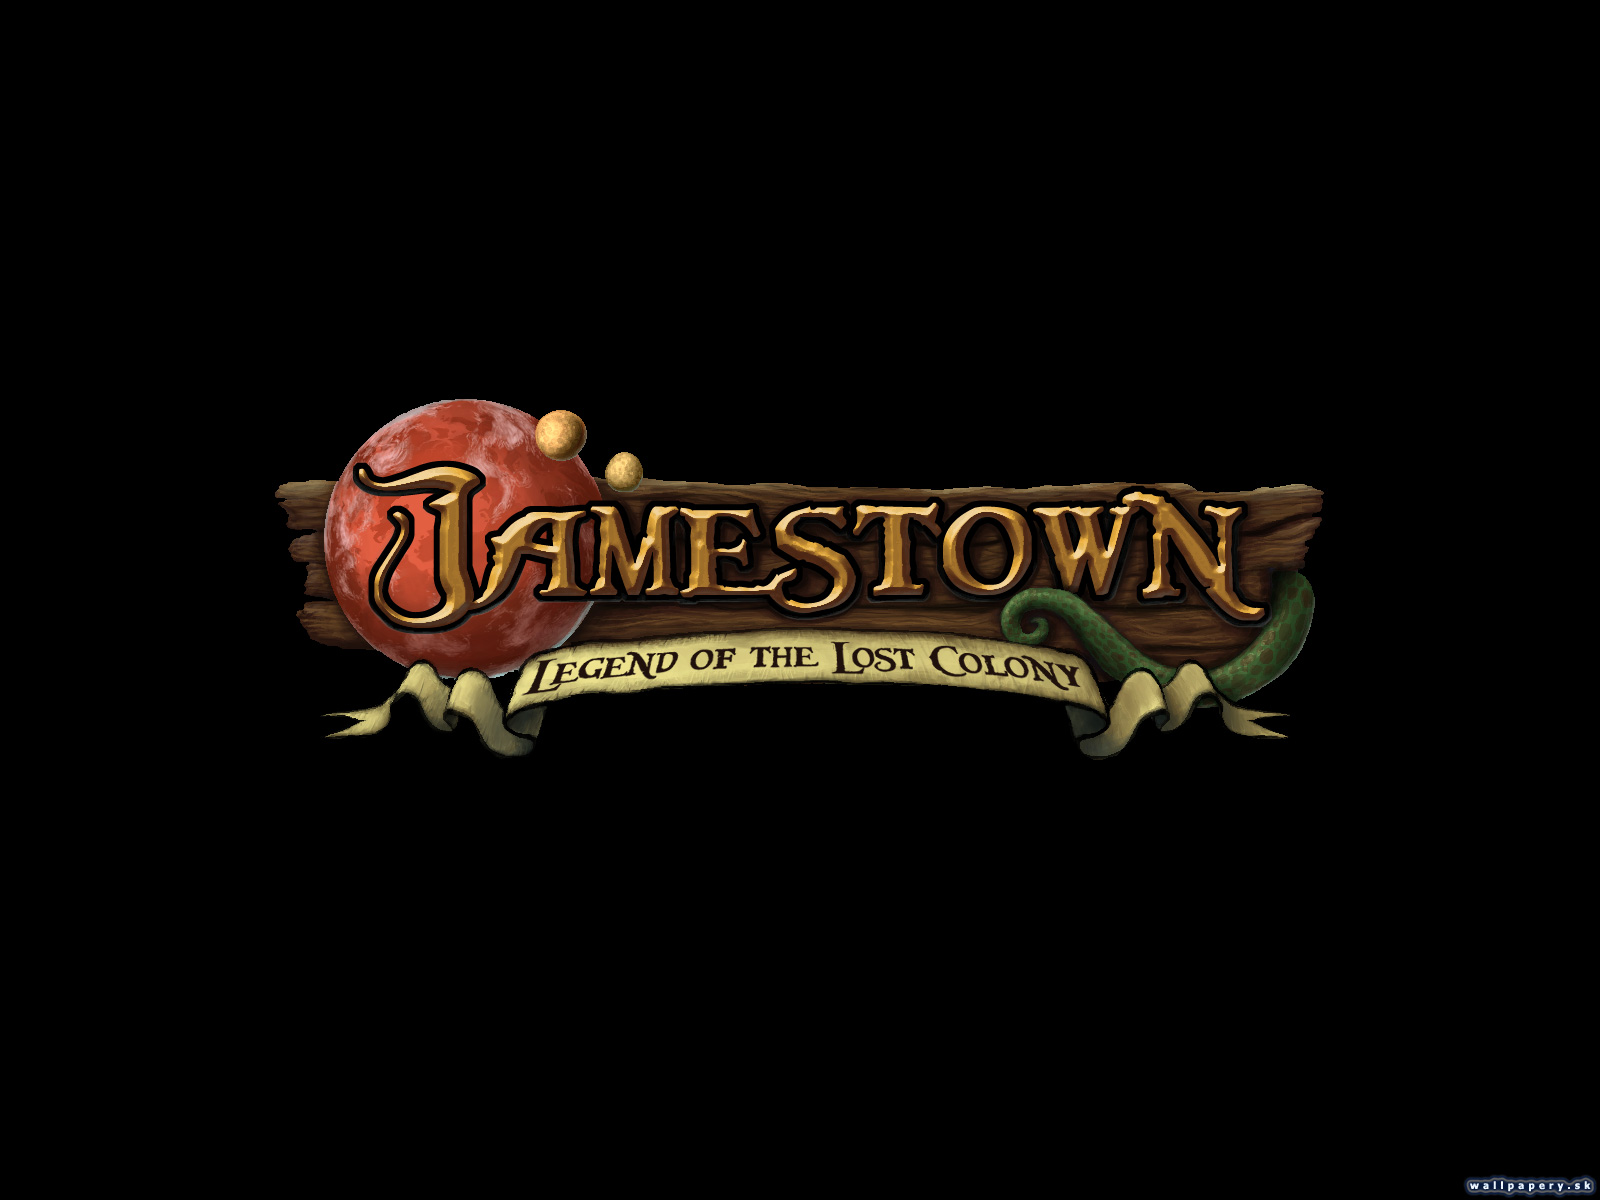 Jamestown: Legend of the Lost Colony - wallpaper 4